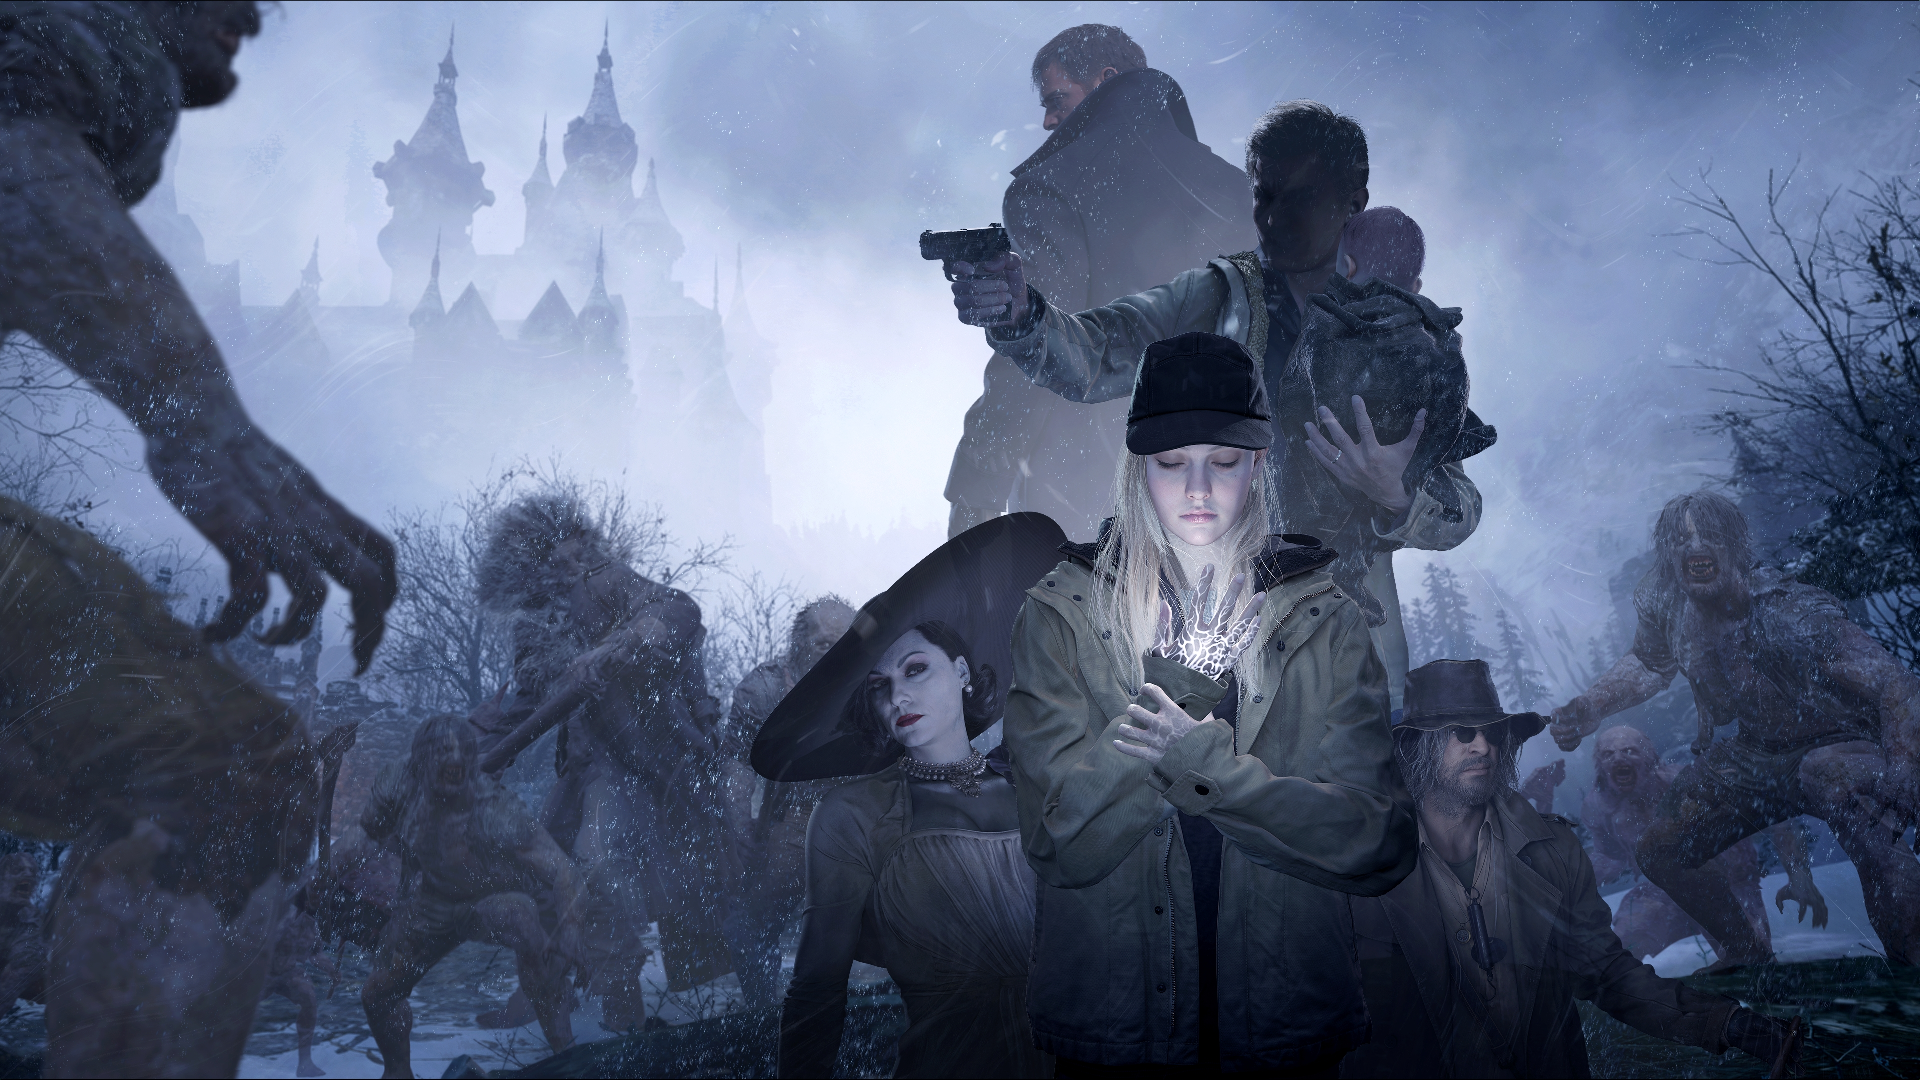 Image for Save 15% on the Resident Evil Village Winters' Expansion DLC at Fanatical